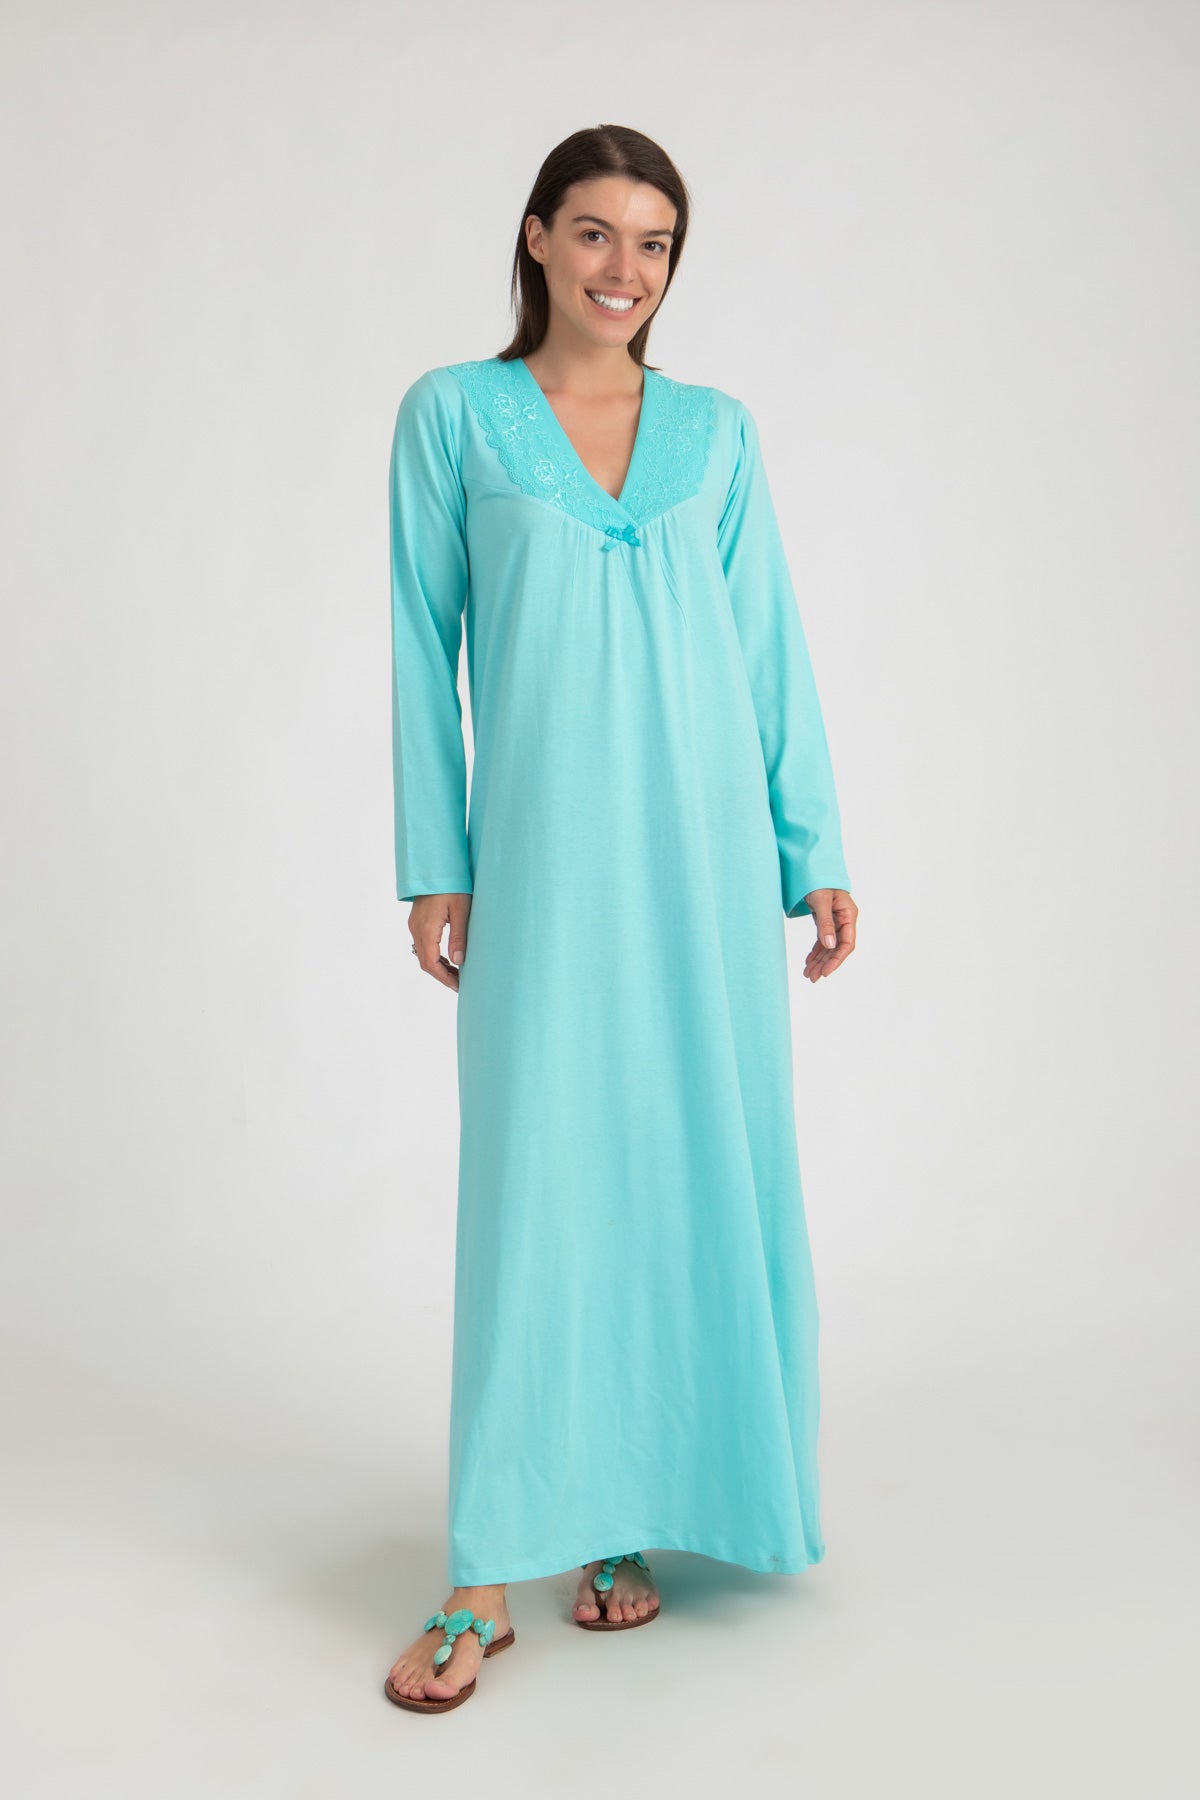 Classic Homdress With Lace neckline